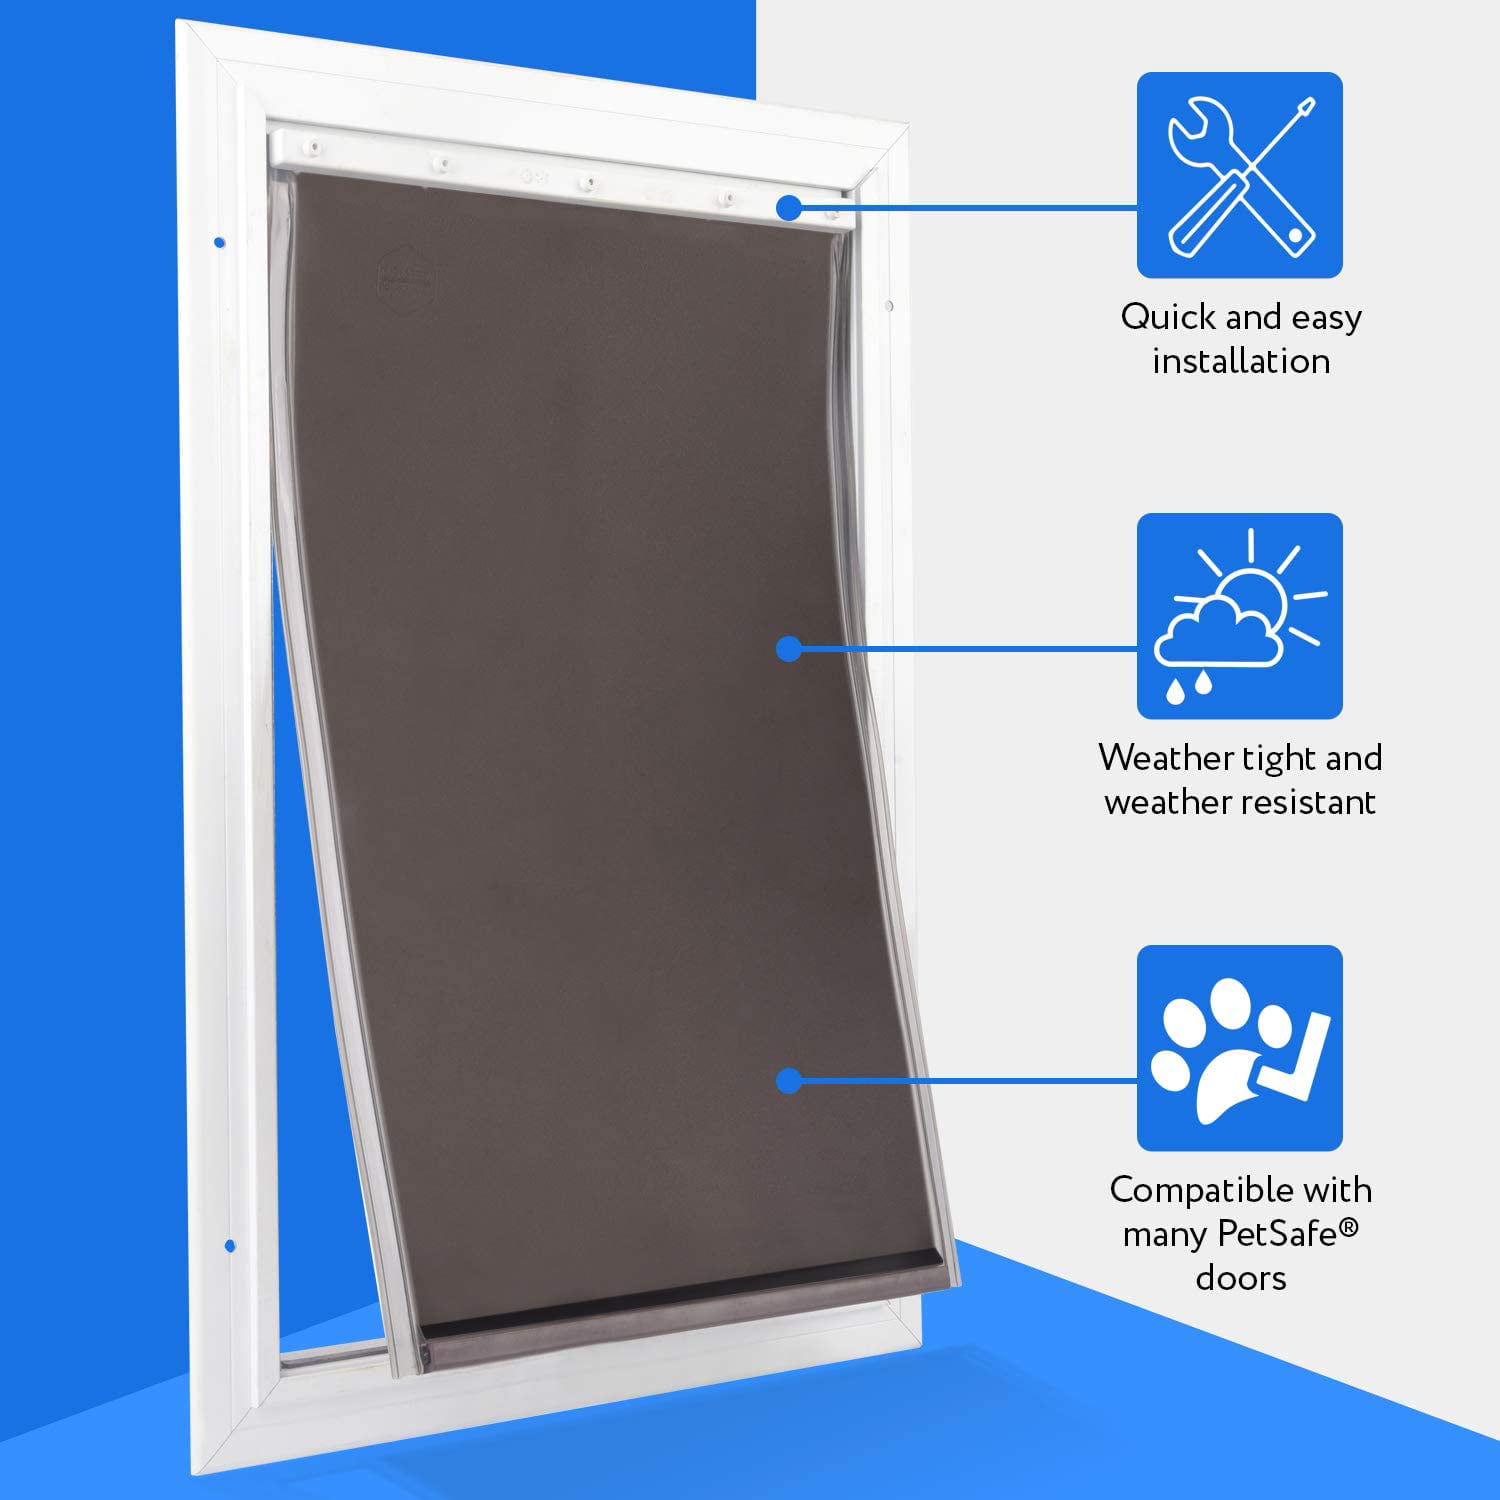 weather resistant materials- Doggie Door Flap Large Replacement Dog Door Flap Compatible with PetSafe Freedom Doggie Doors Weather Resistant durable Measures 10 1/8 x 16 7/8 Made from flexible 